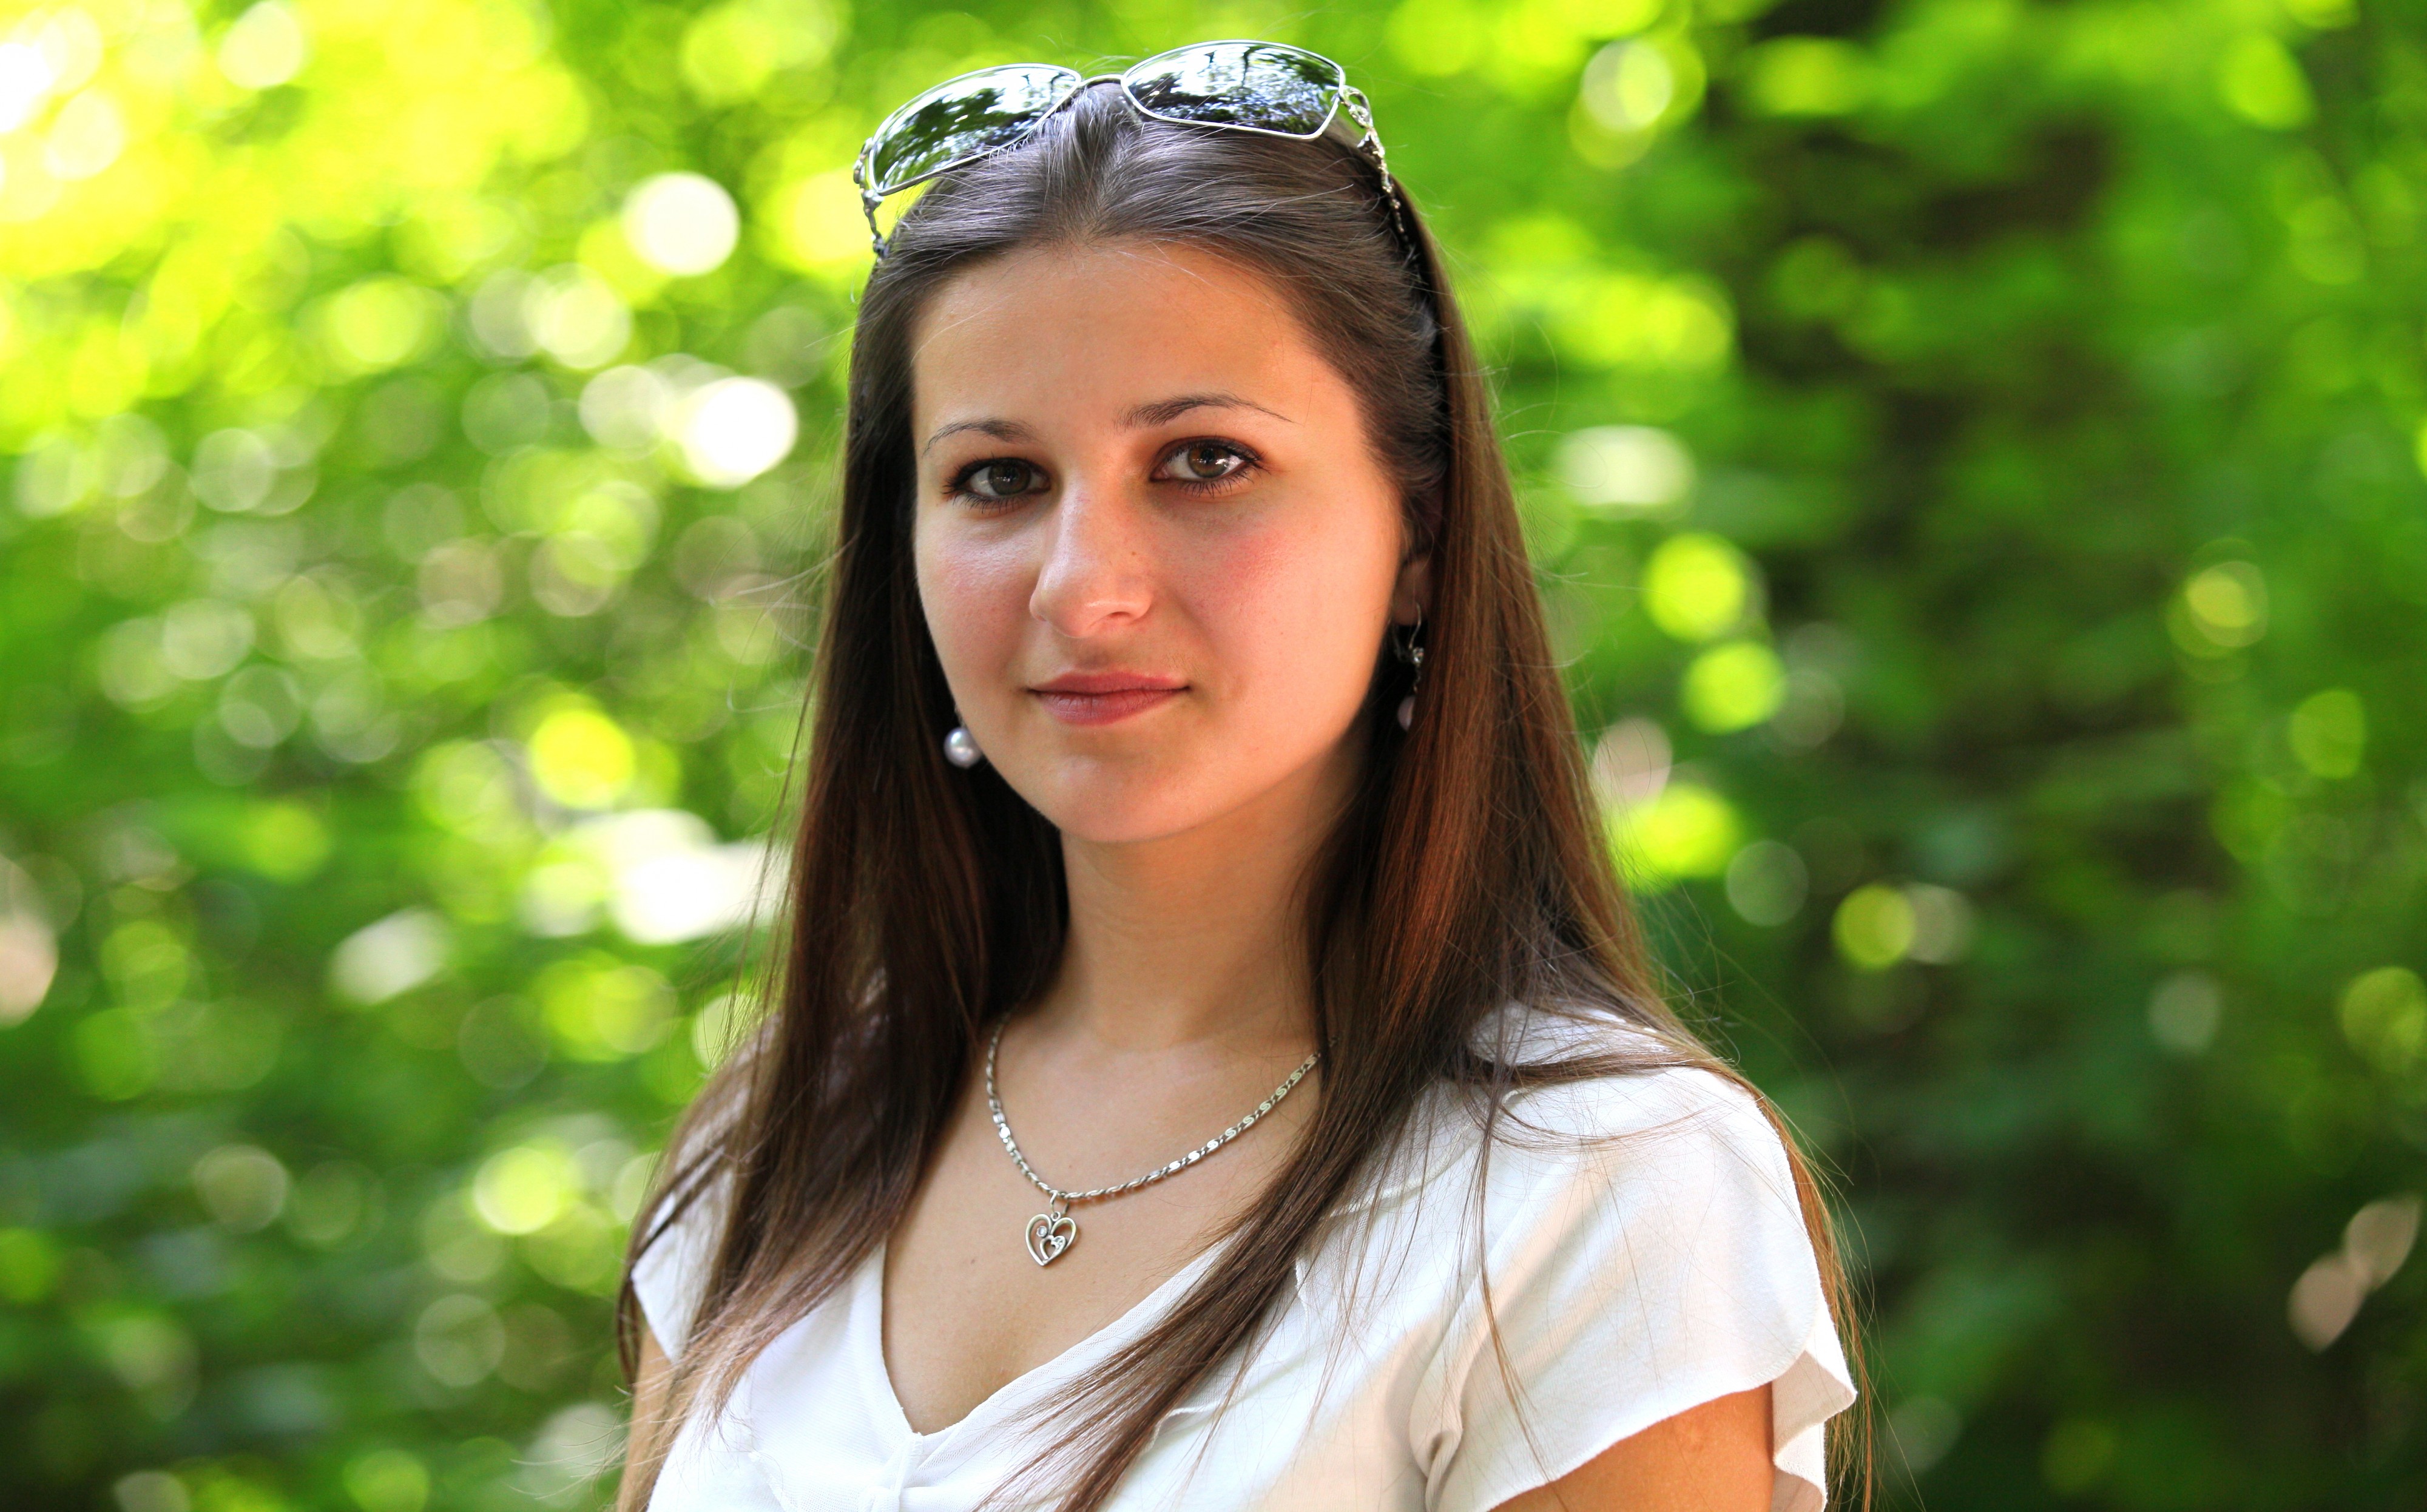 a marvelously beautiful Catholic girl photographed in July 2013, picture 13/22